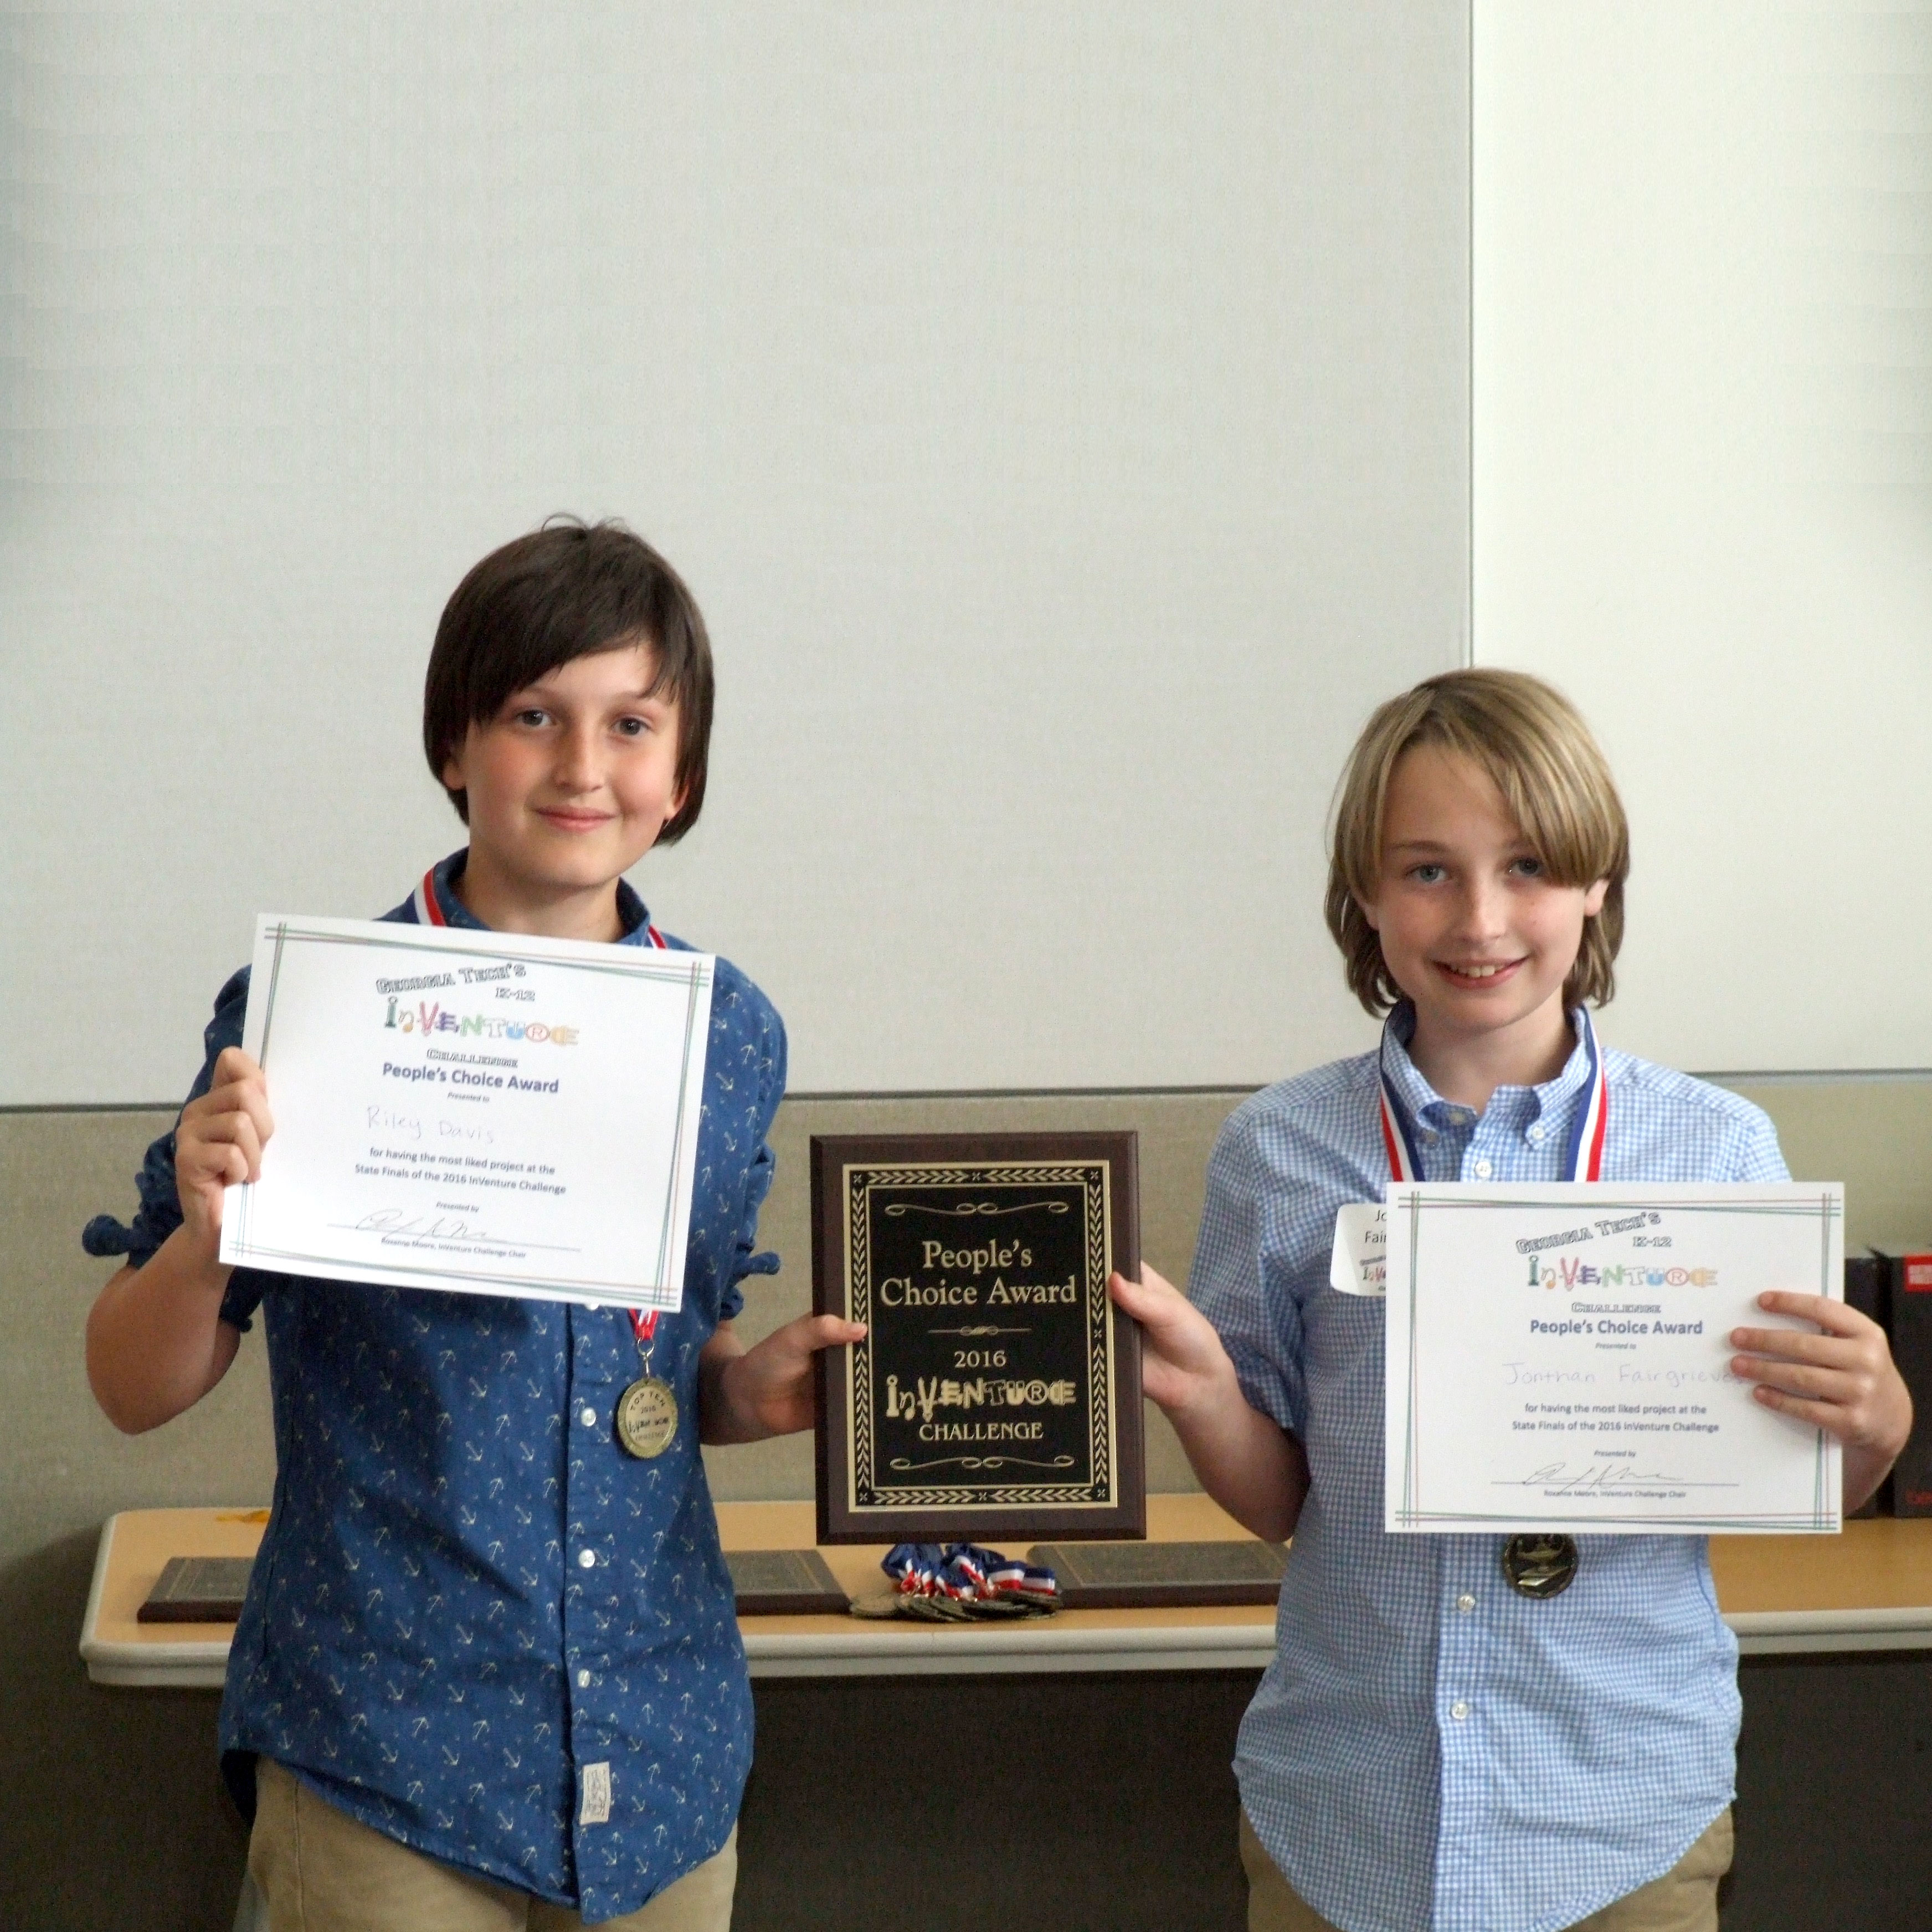 Two smiling students holding up certificates and a plaque